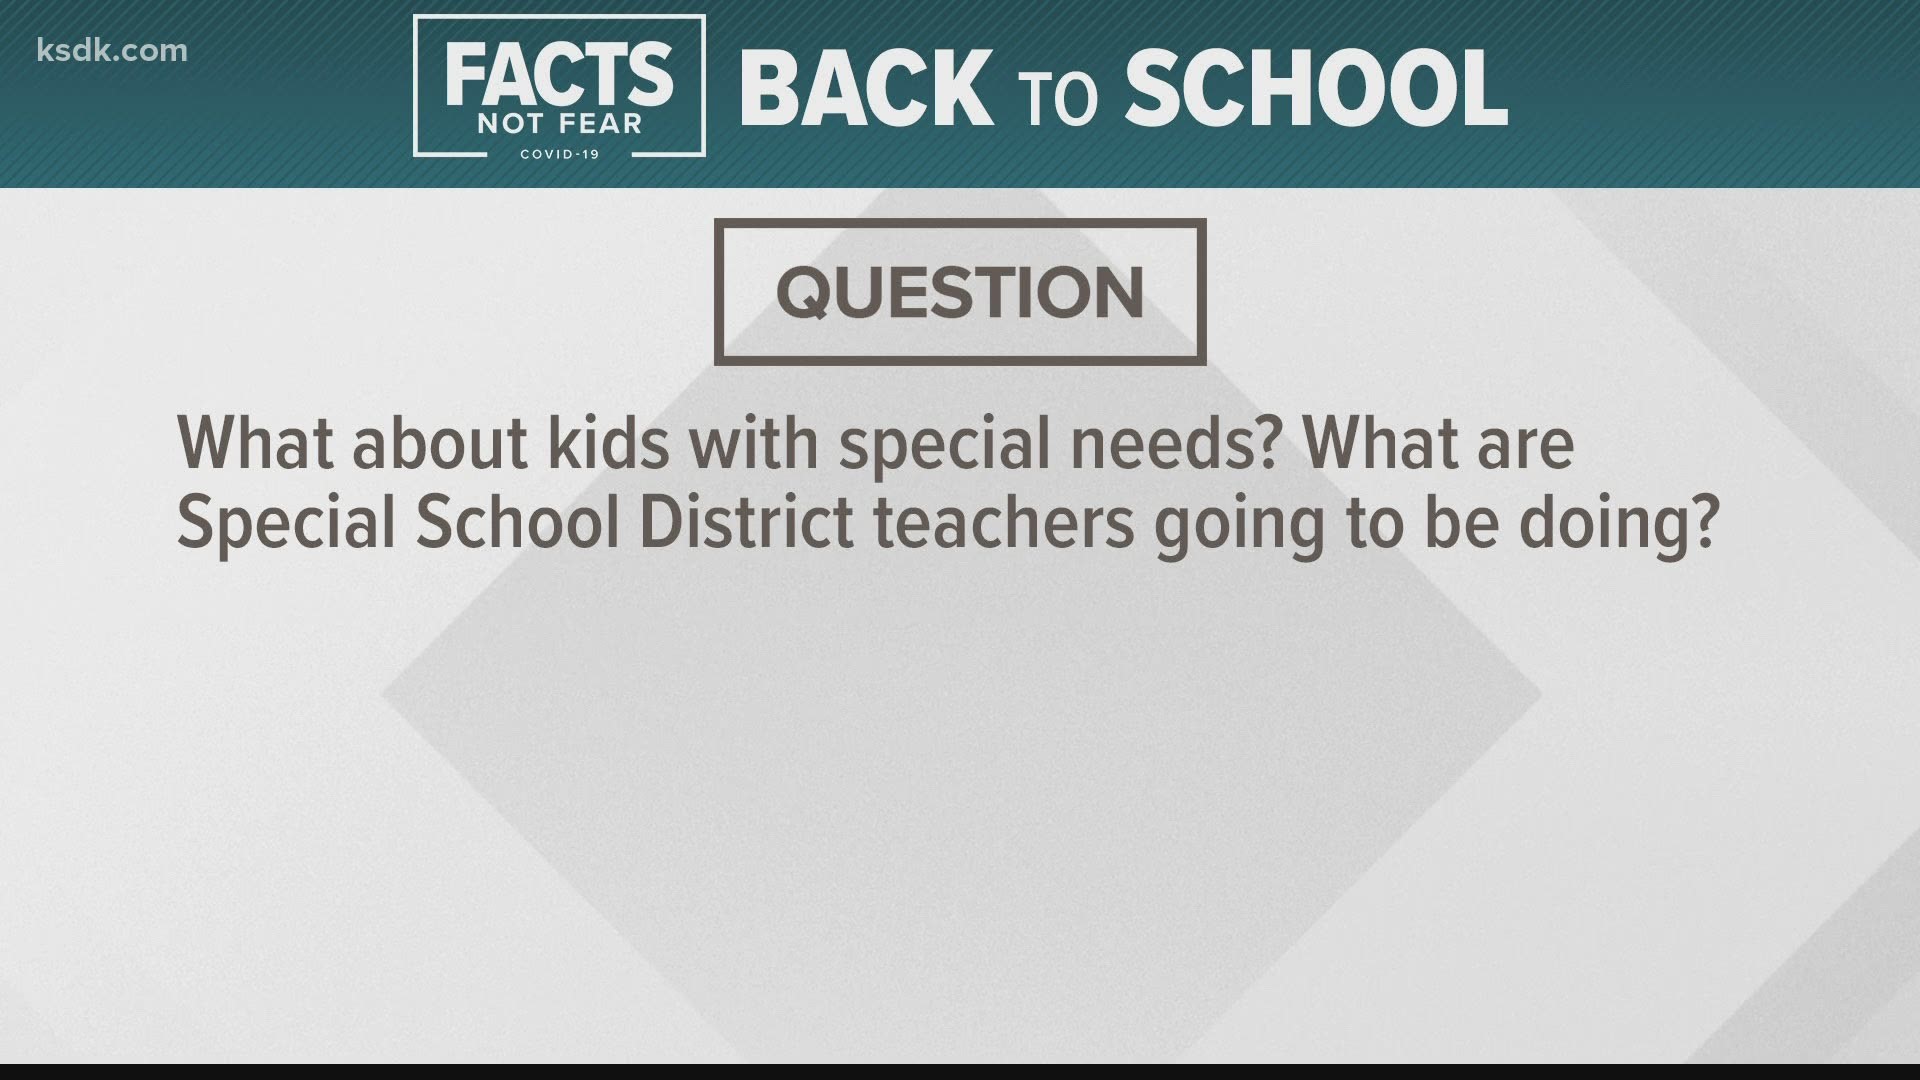 We're partnering with education experts to answer your back-to-school questions.